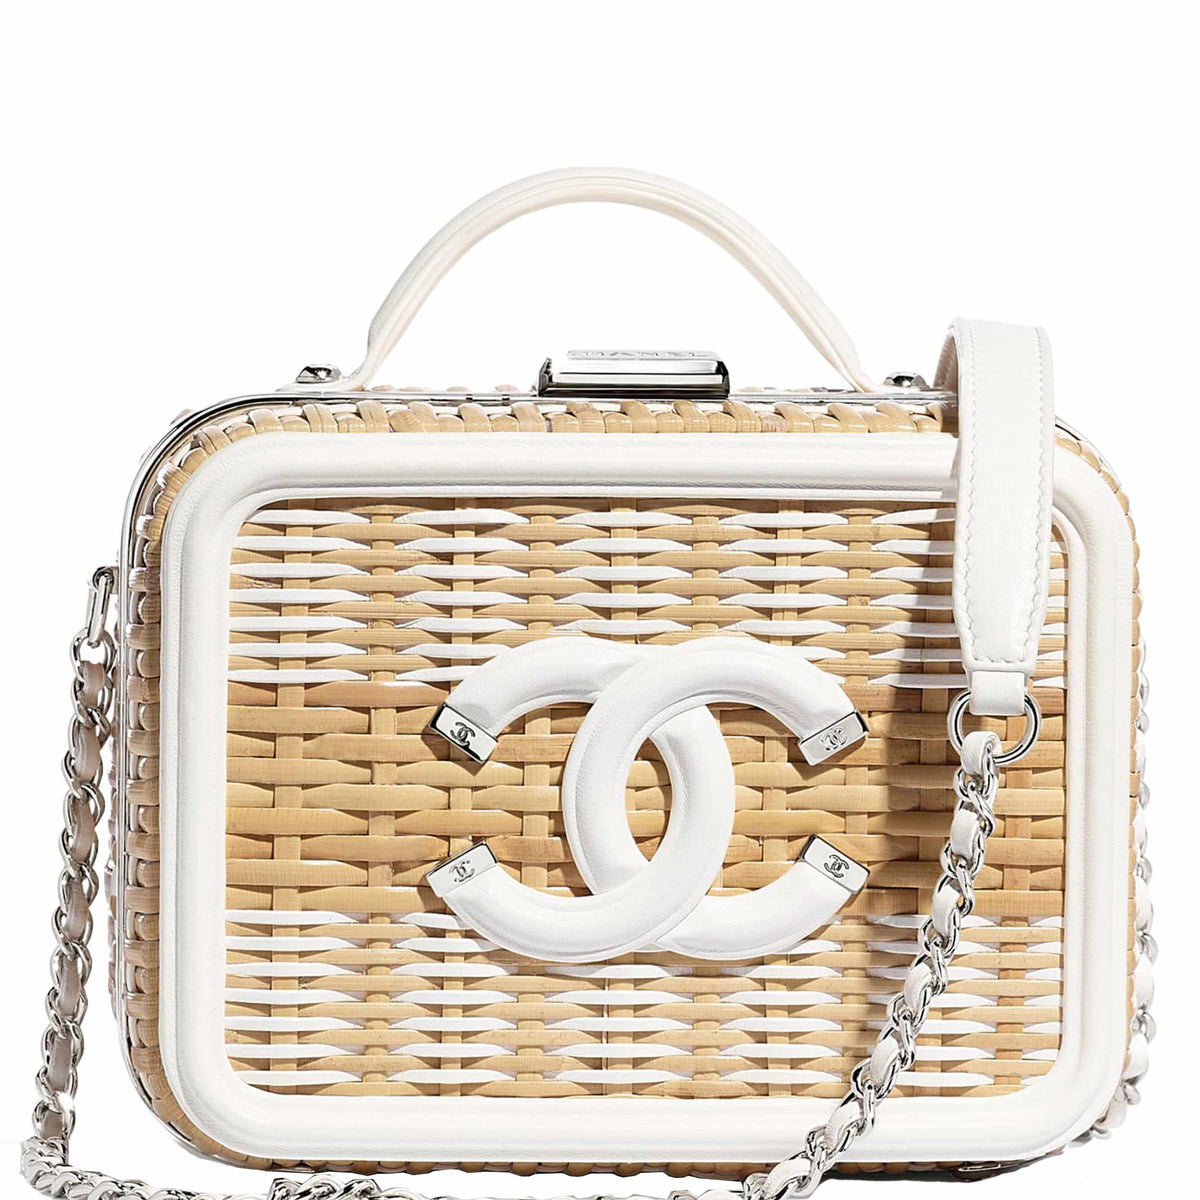 Chanel Beige Rattan & Gold Calfskin Small Vanity Case by WP